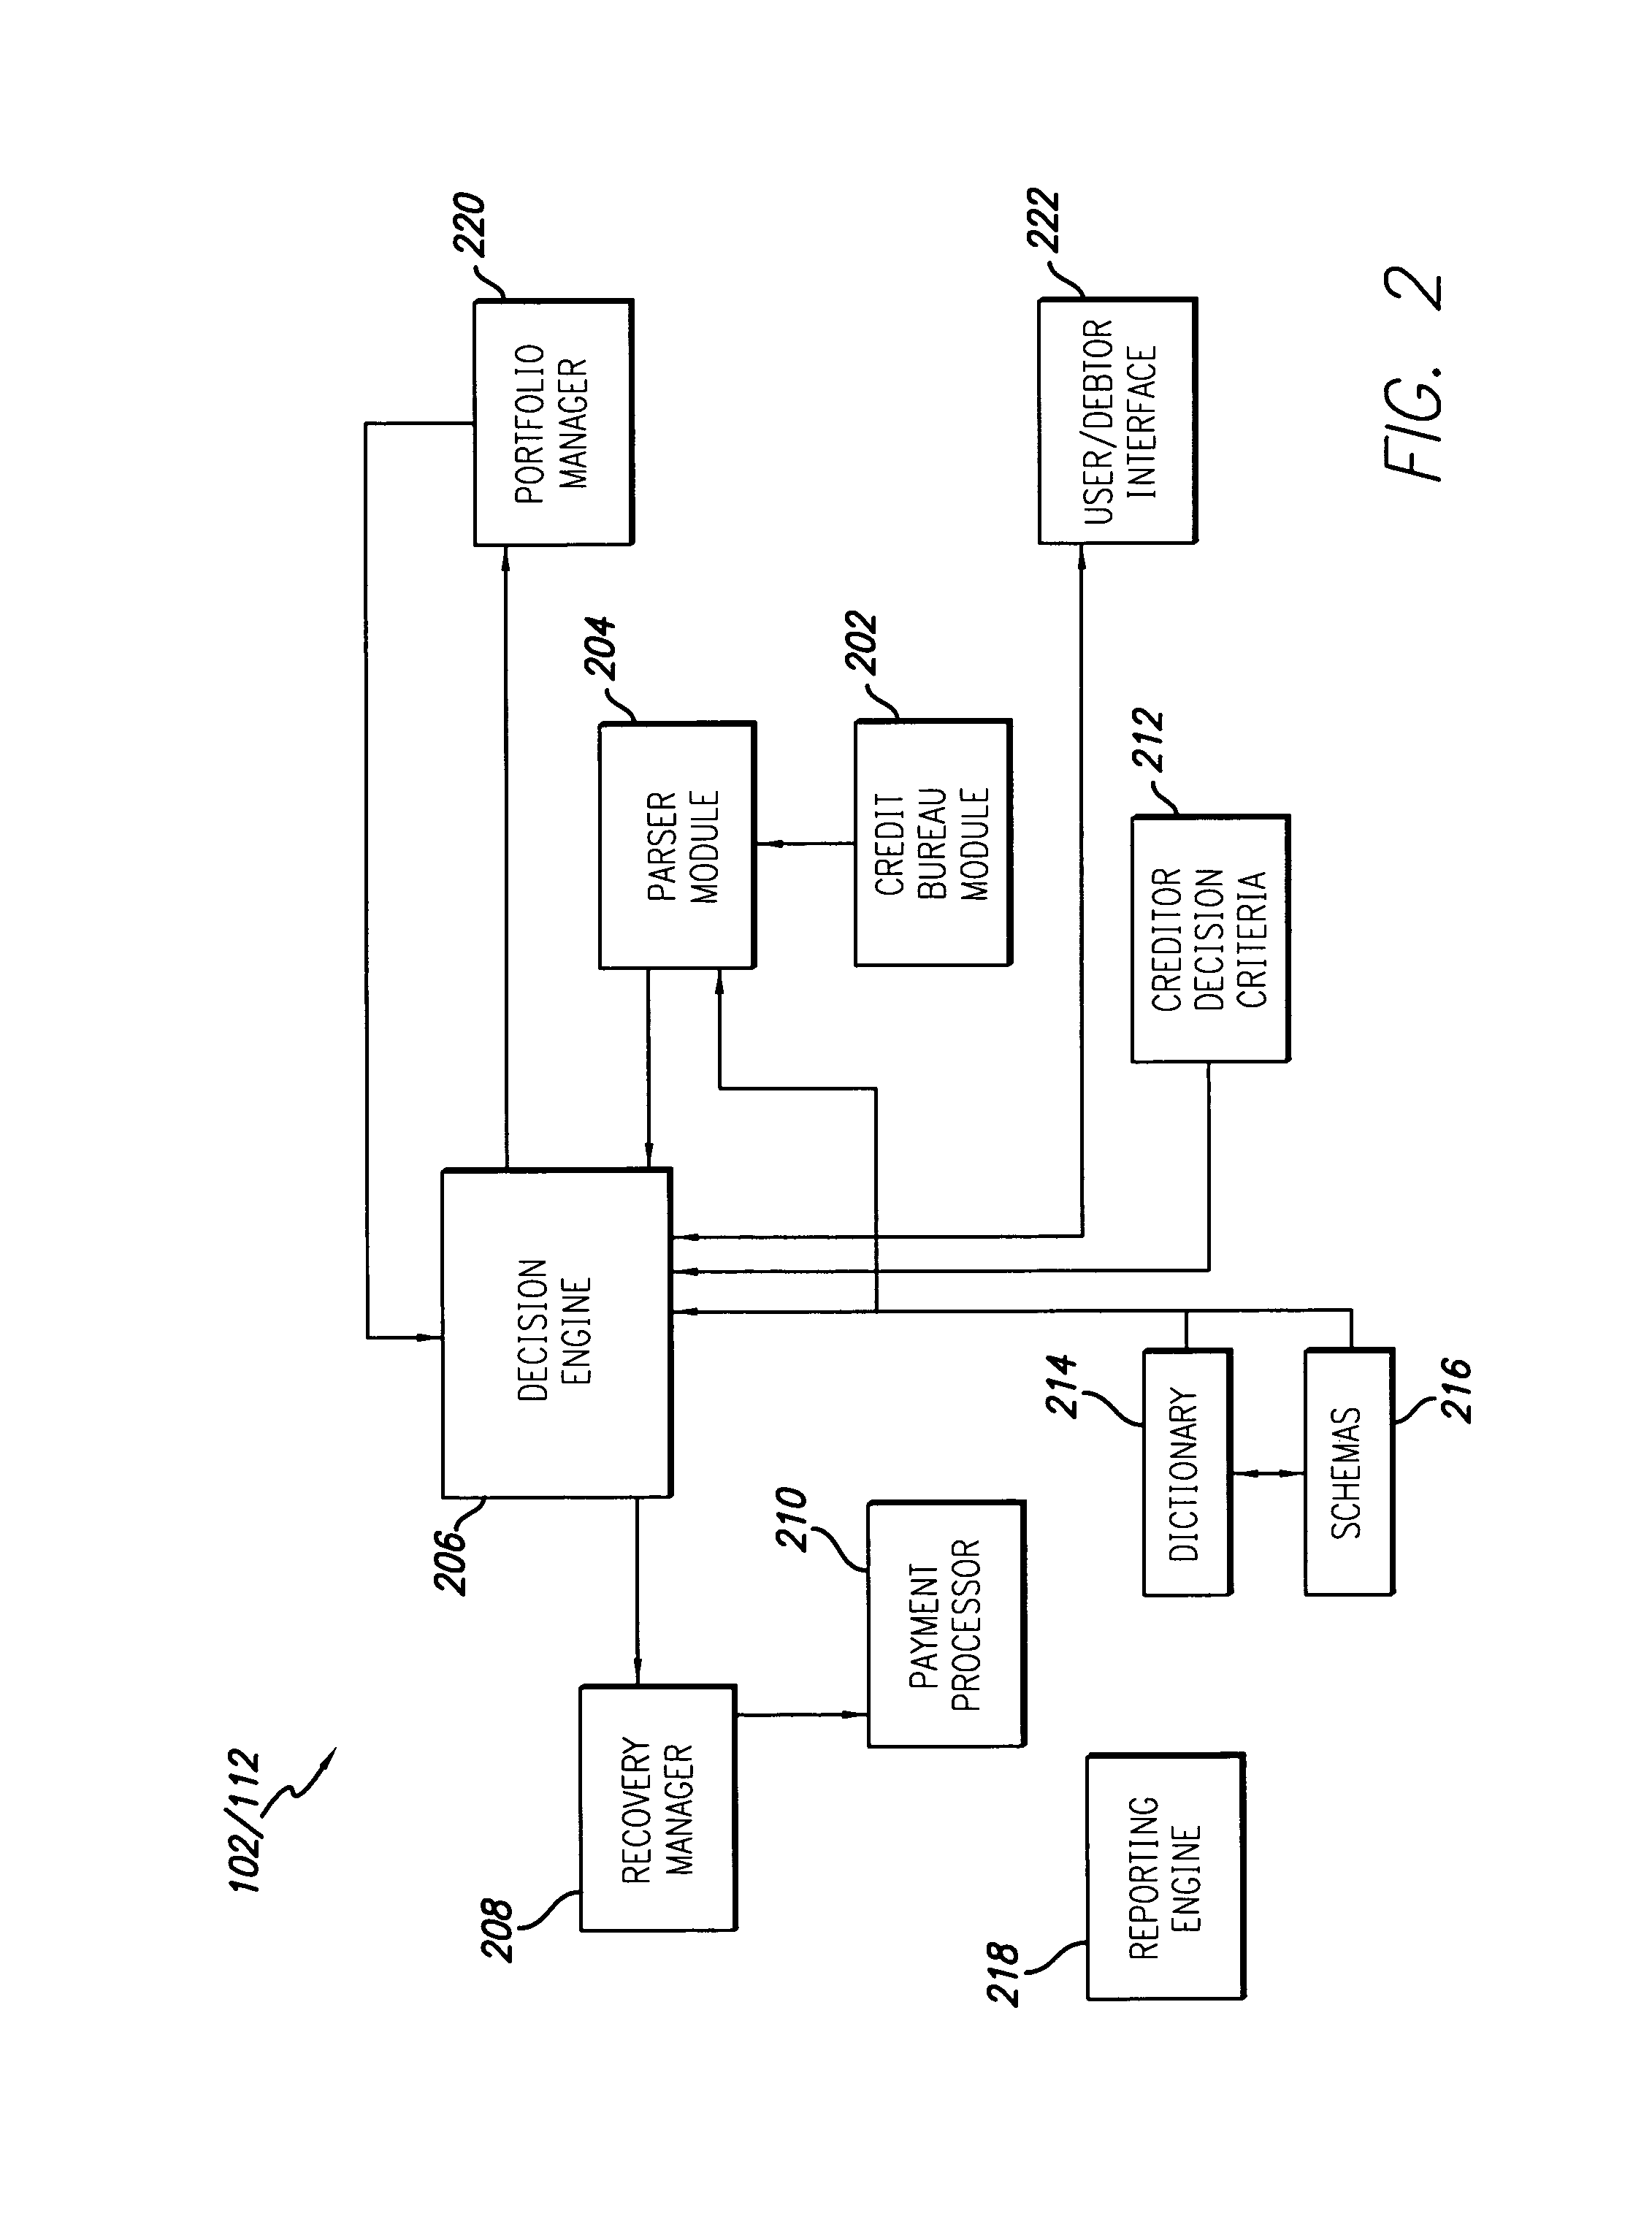 System and method for resolving transactions with variable offer parameter selection capabilities